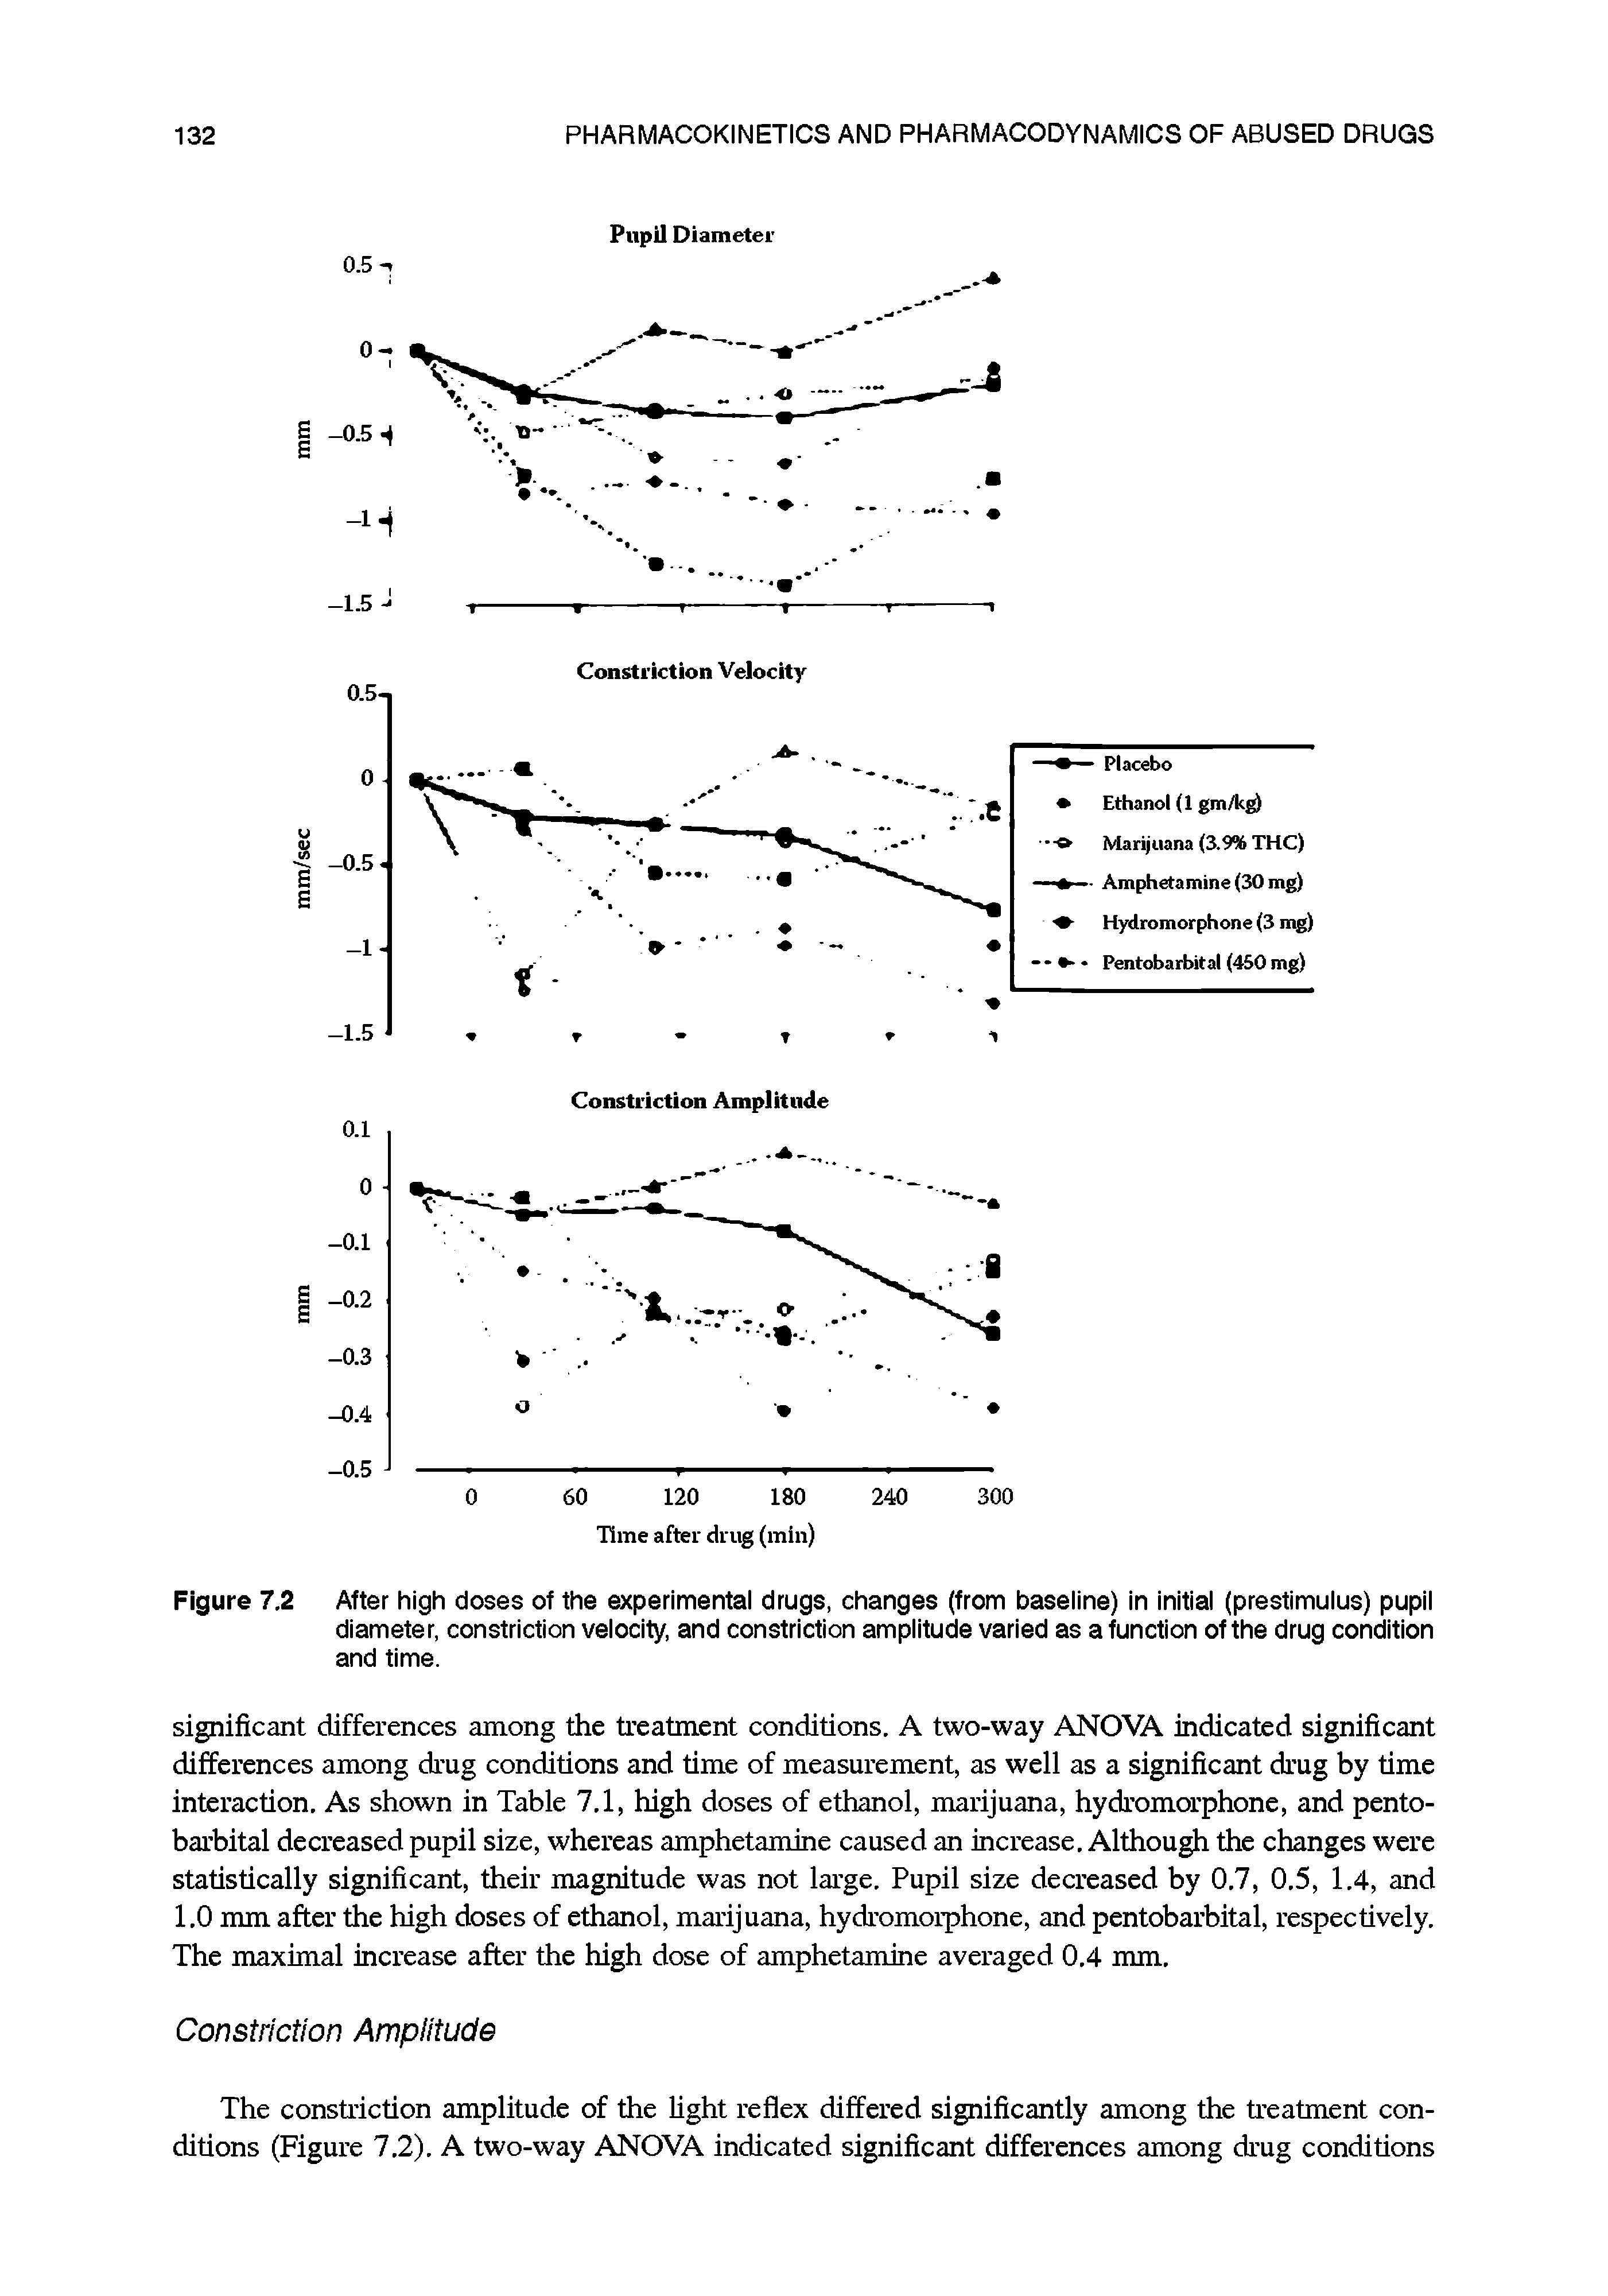 Figure 7.2 After high doses of the experimental drugs, changes (from baseline) in initial (p re stimulus) pupil diameter, constriction velocity, and constriction amplitude varied as a function of the drug condition and time.